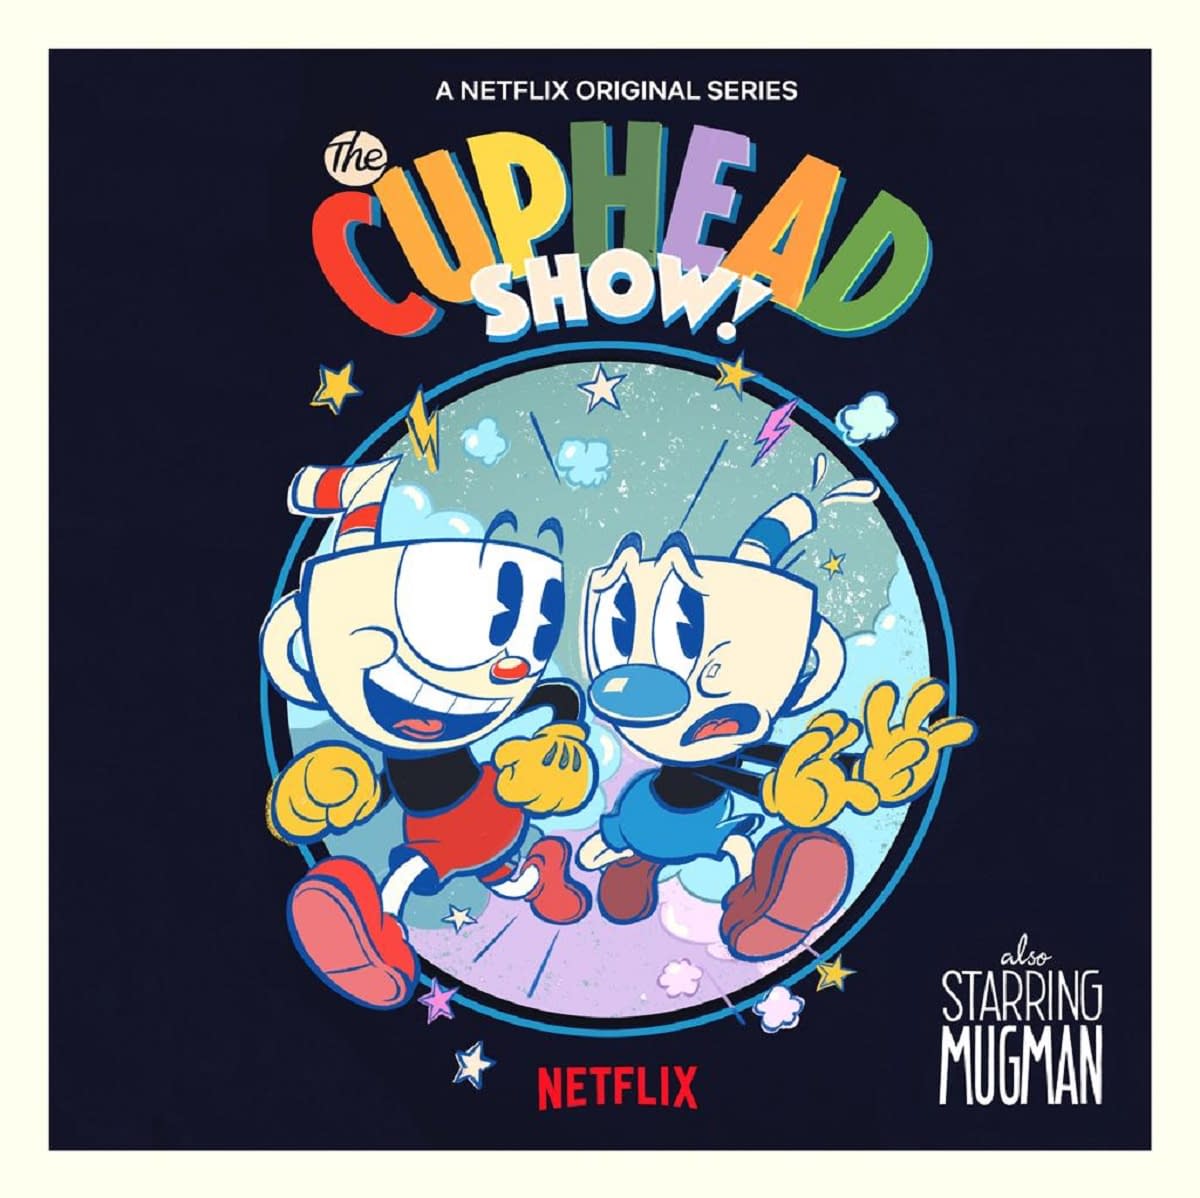 "The Cuphead Show!": Cuphead &#038; Friends Set for All-Ages Animated Netflix Series